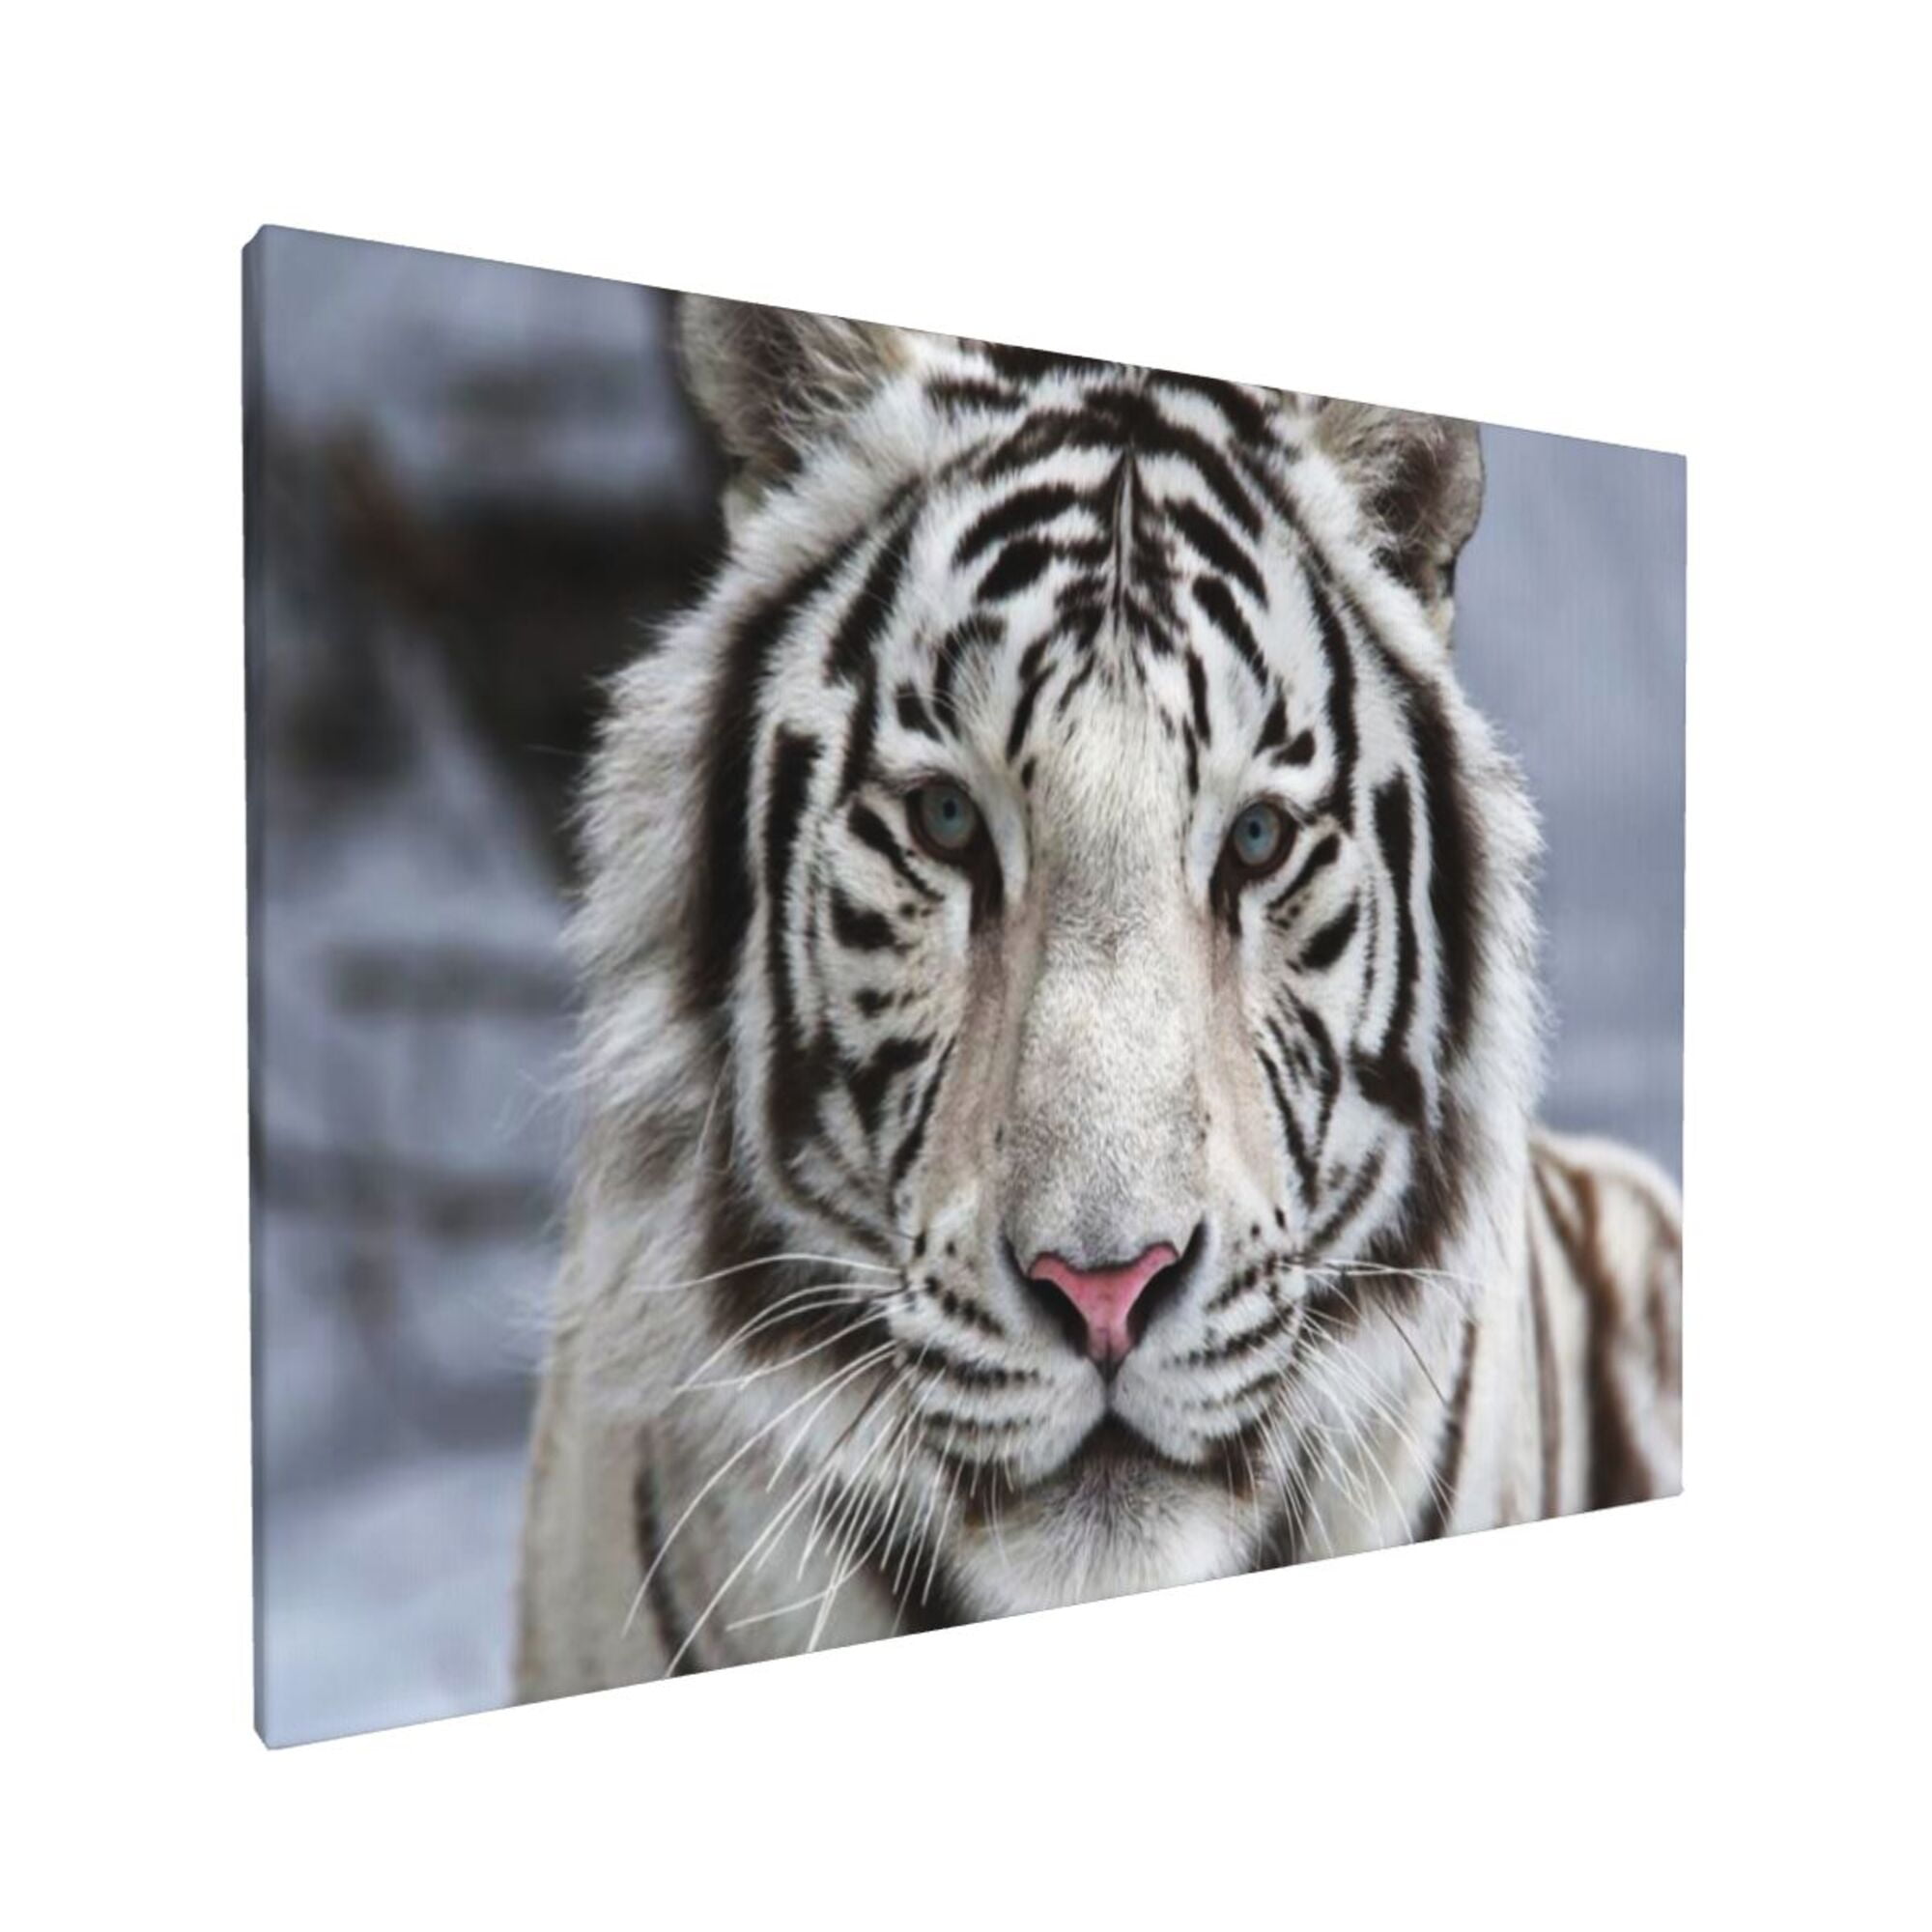 Decor White Tiger Wall Decor Bathroom Canvas Painting Modern Decorations  Framed Artwork For Bathroom Bedroom Living Room 12x16in